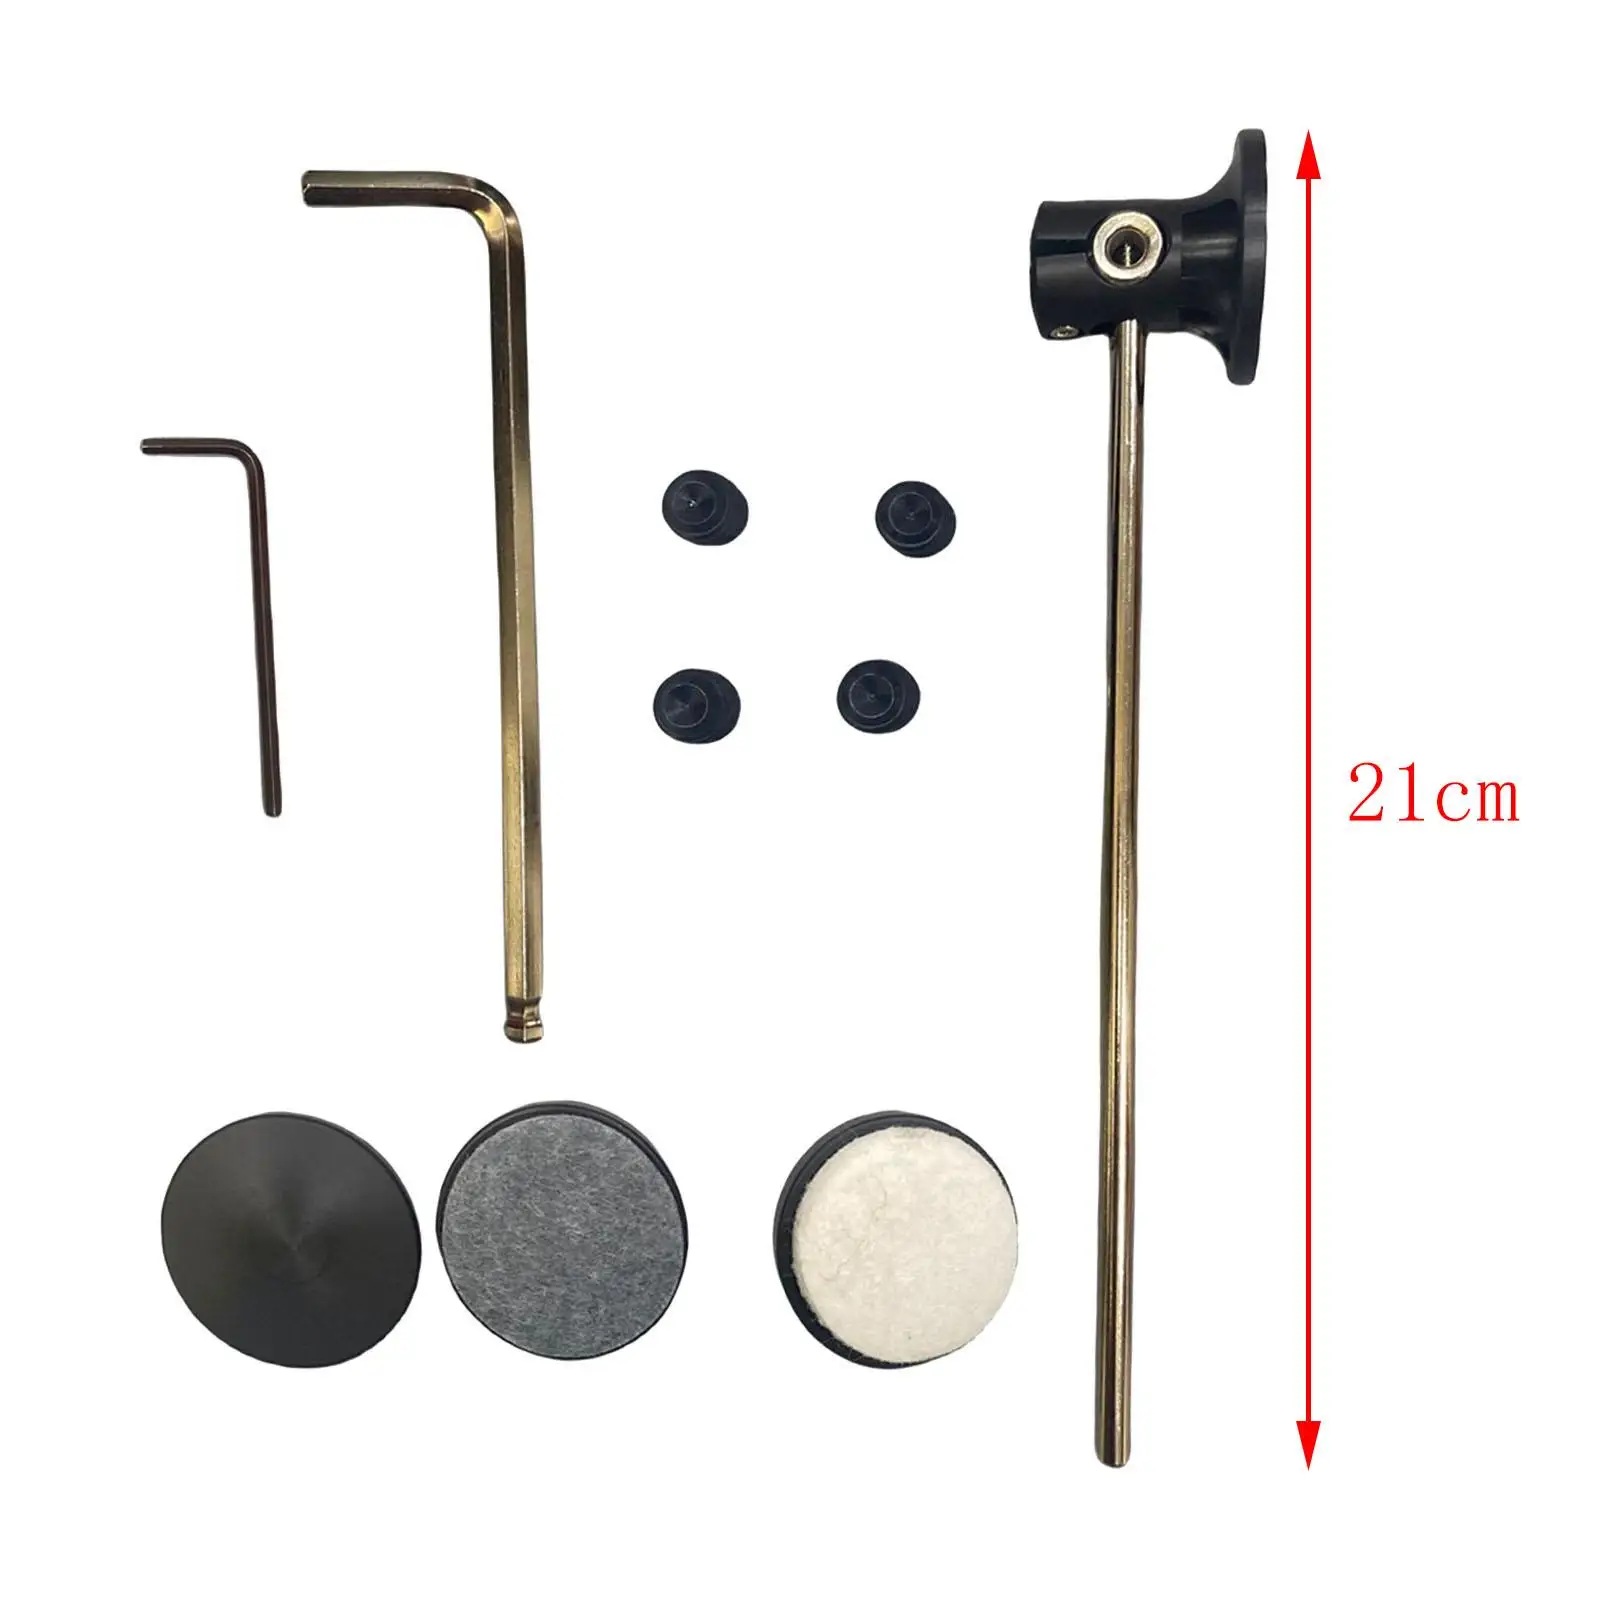 3Pcs Drum Pedal Beater Heads Instrument Band Accessory Metal Shaft Durable Bass Drum Pedal Mallet Heads Drum Upgrade Replacement